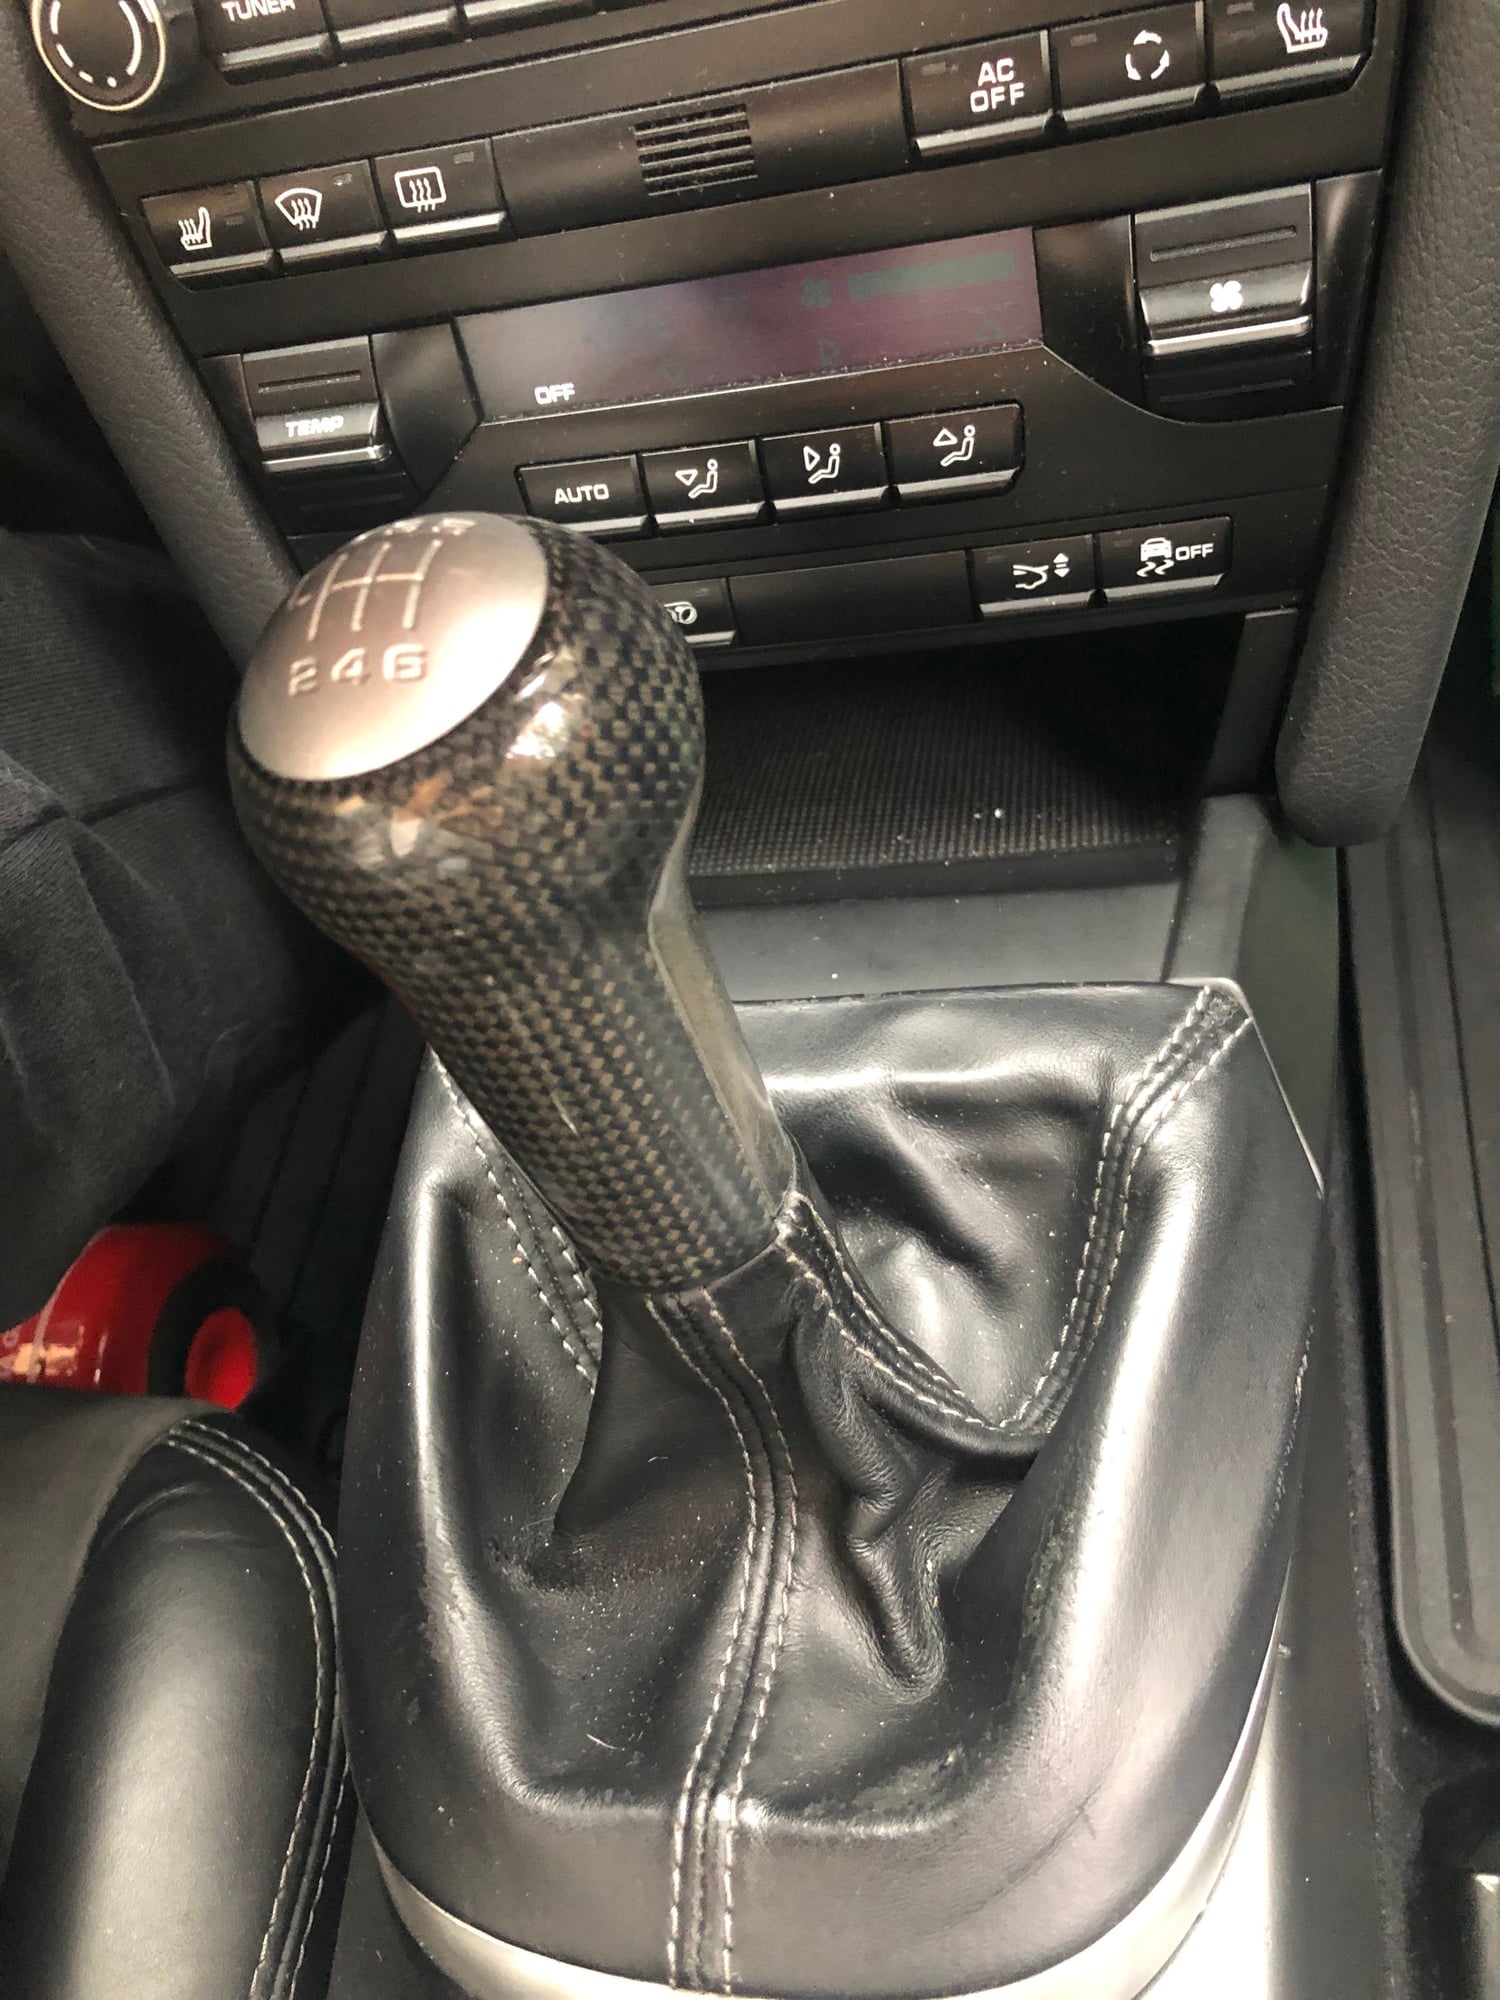 Interior/Upholstery - 996/997/Boxster Carbon Shift Knob with leather boot - Used - 2000 to 2012 Porsche 911 - Playa Del Rey, CA 90293, United States